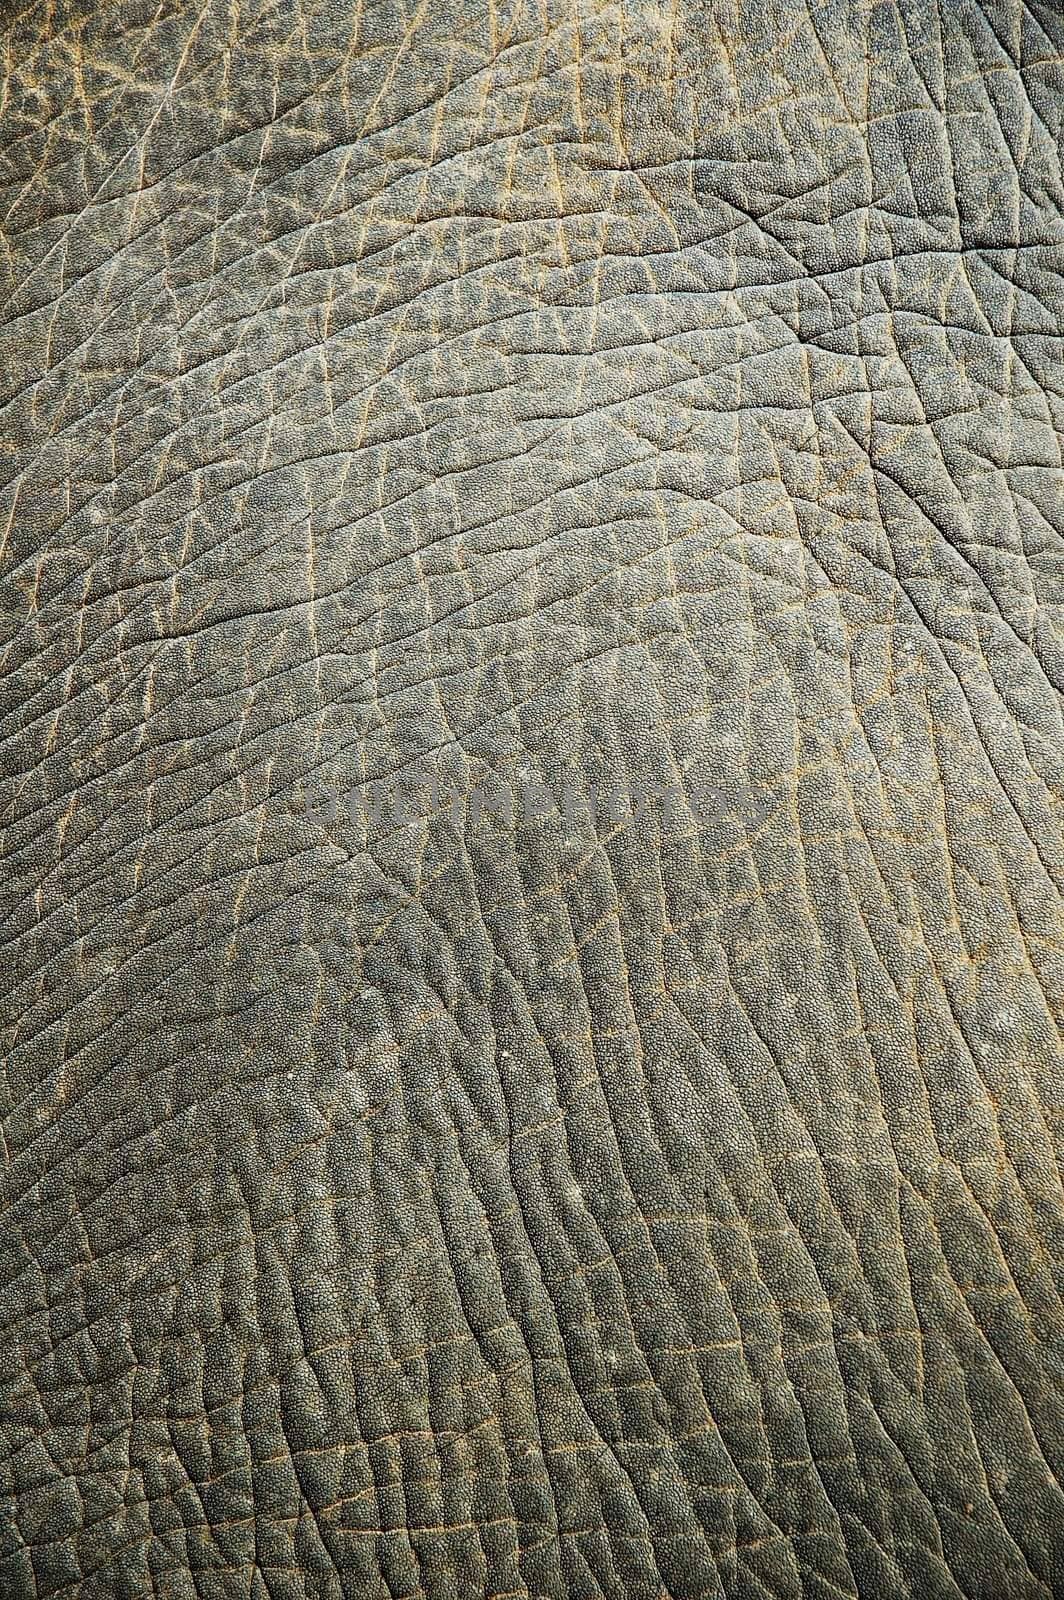 Abstract texture from an elephant skin. Good natural background